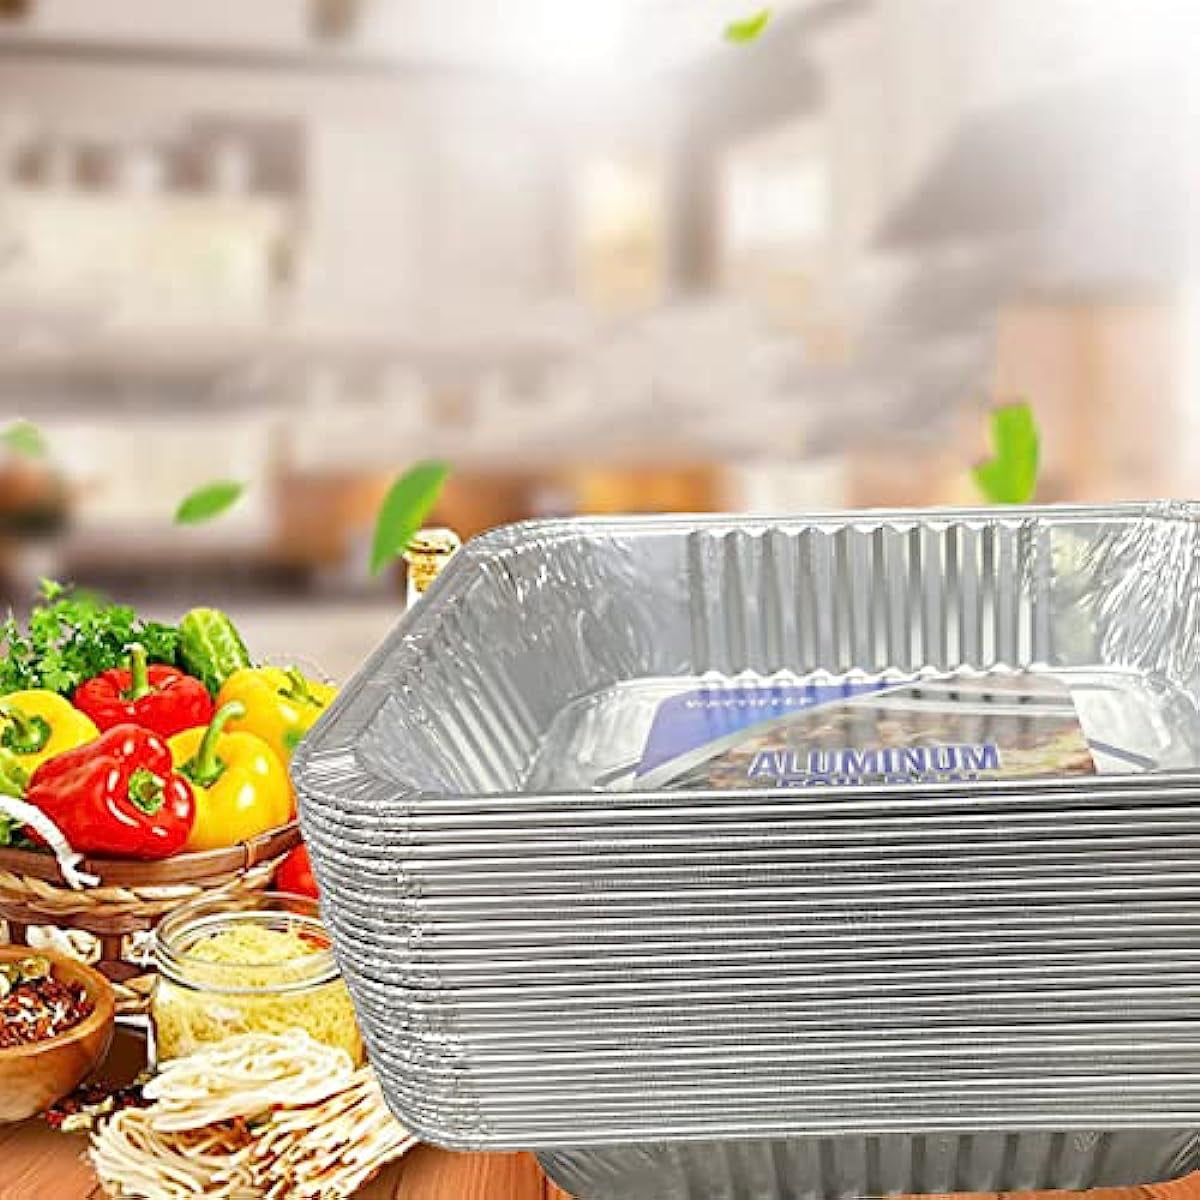 XIAFEI 9x13 Aluminum Foil Pans with Lids (25 Pack) ，Half Size Deep，25 Foil  Pans and 25 Foil Lids，Disposable Food Containers Great for Cooking